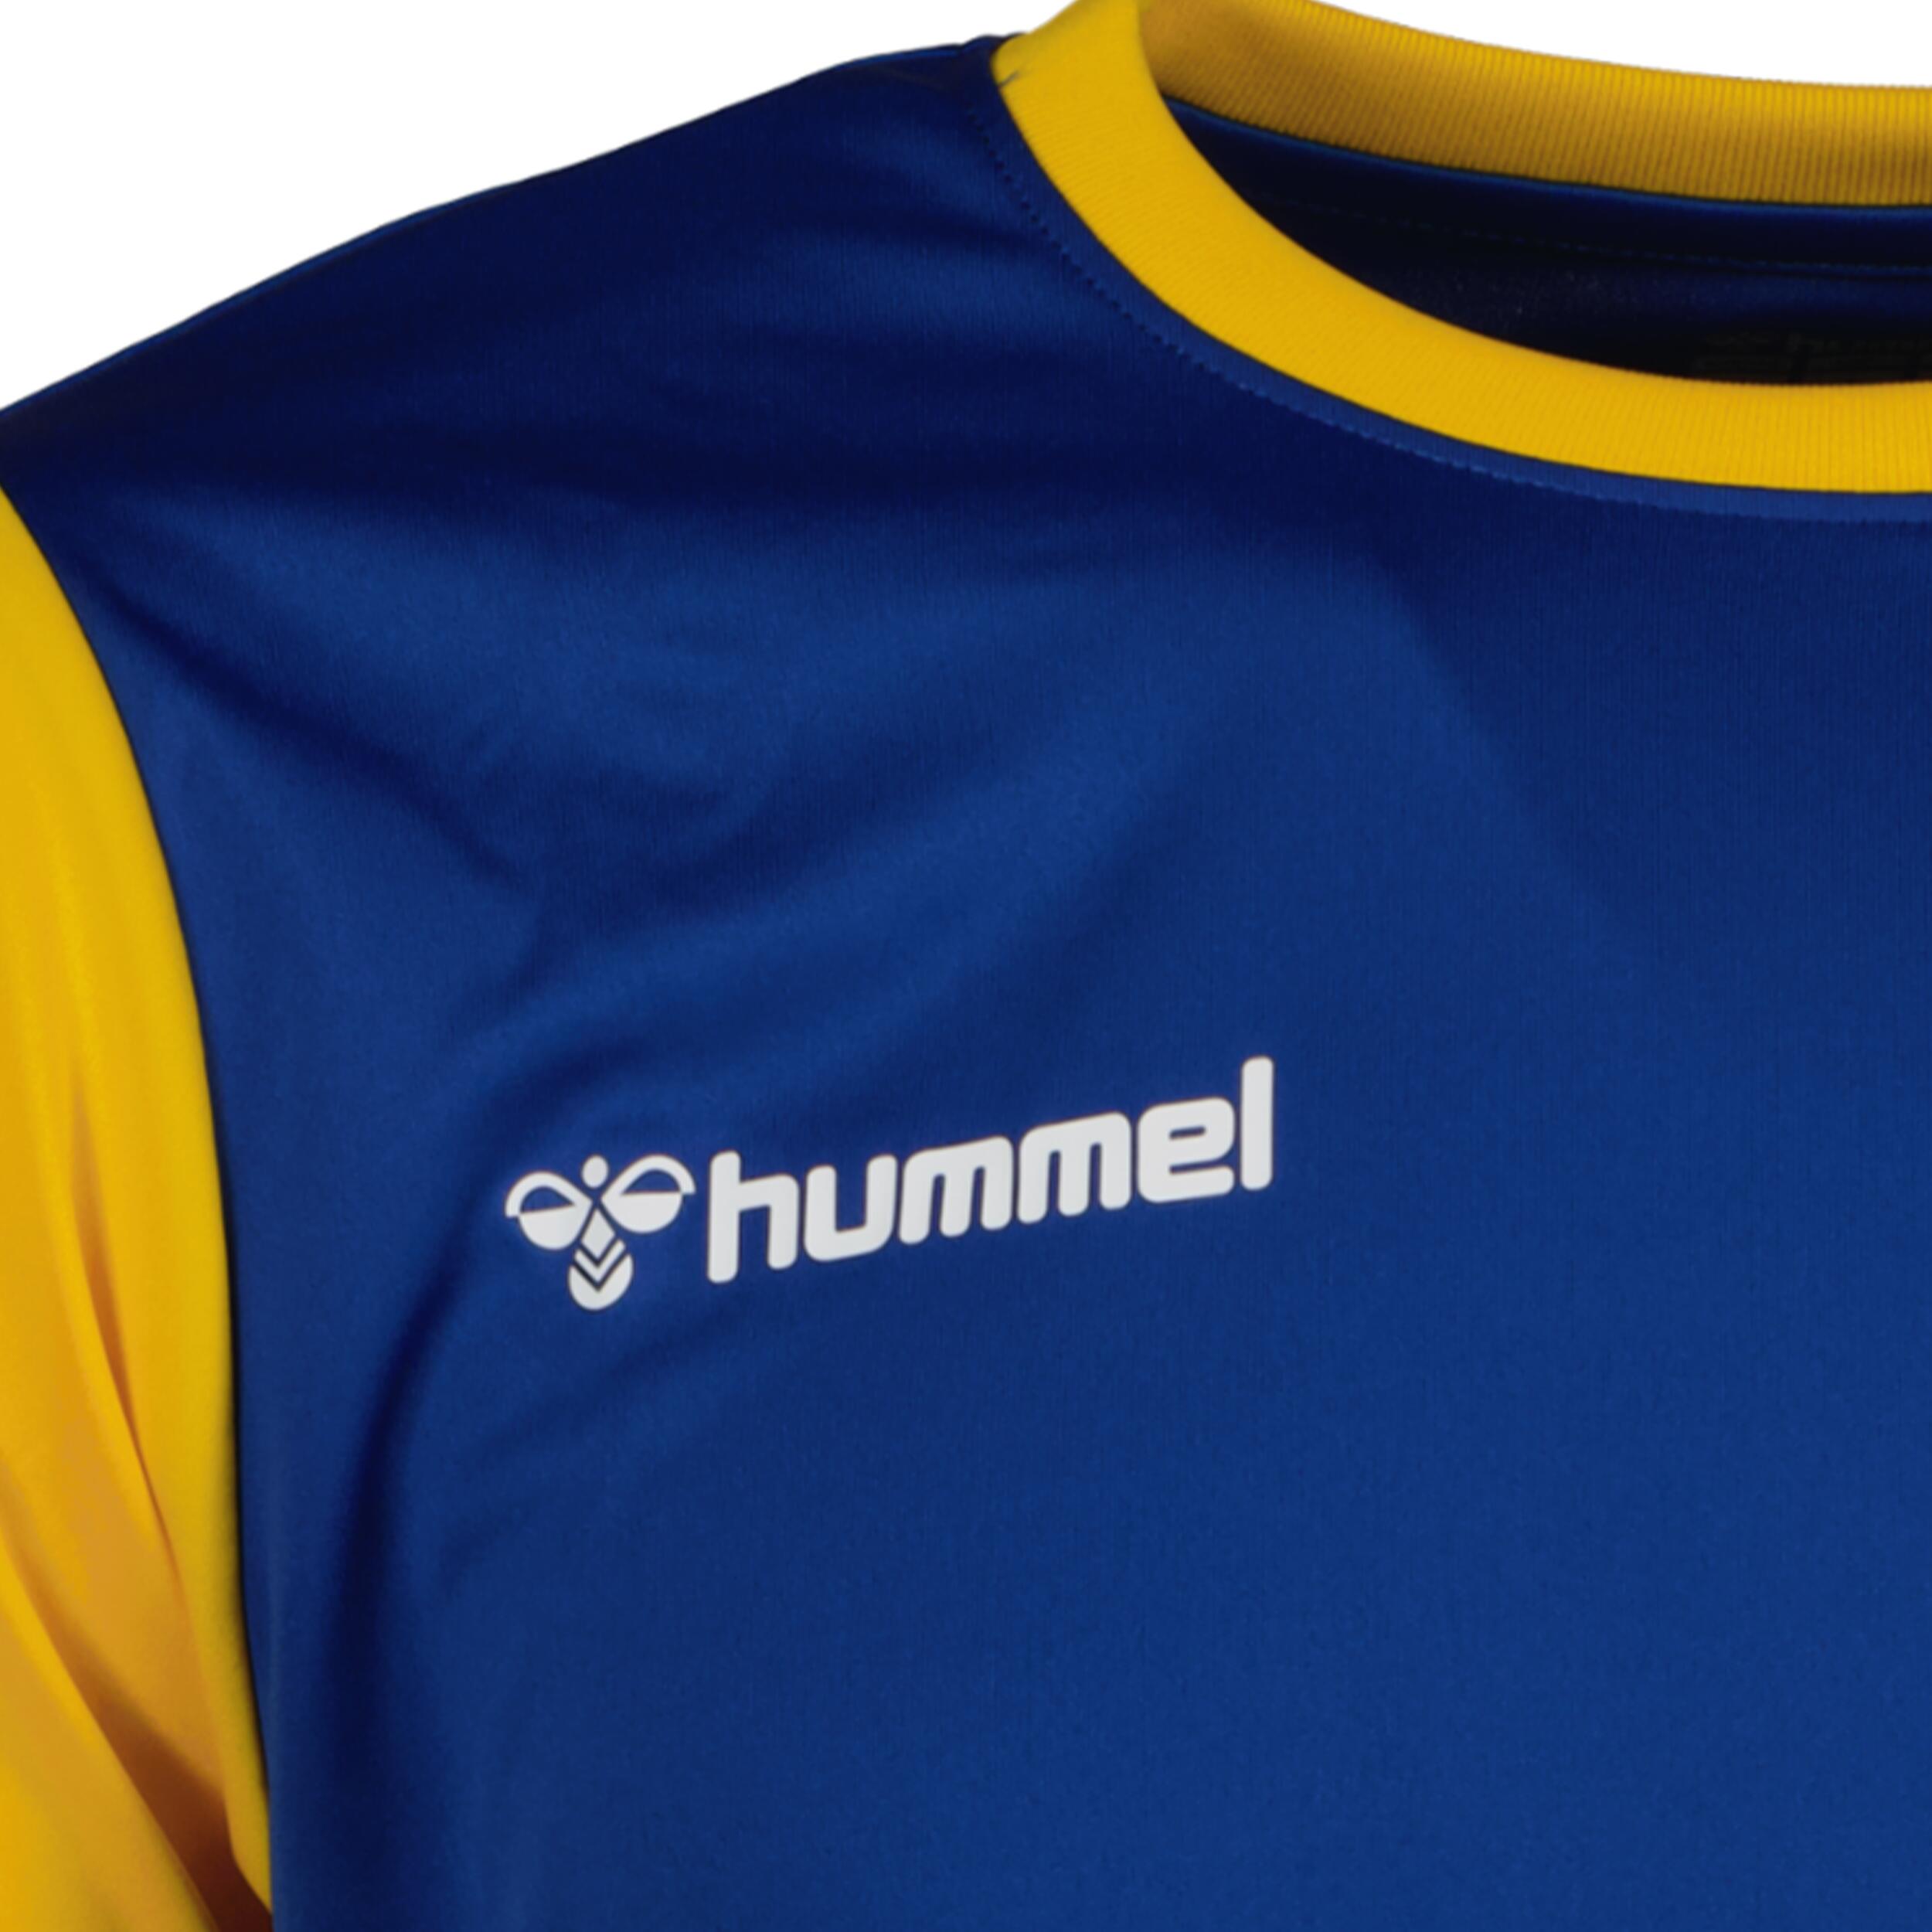 Match jersey for men, great for football, in blue/yellow 3/3